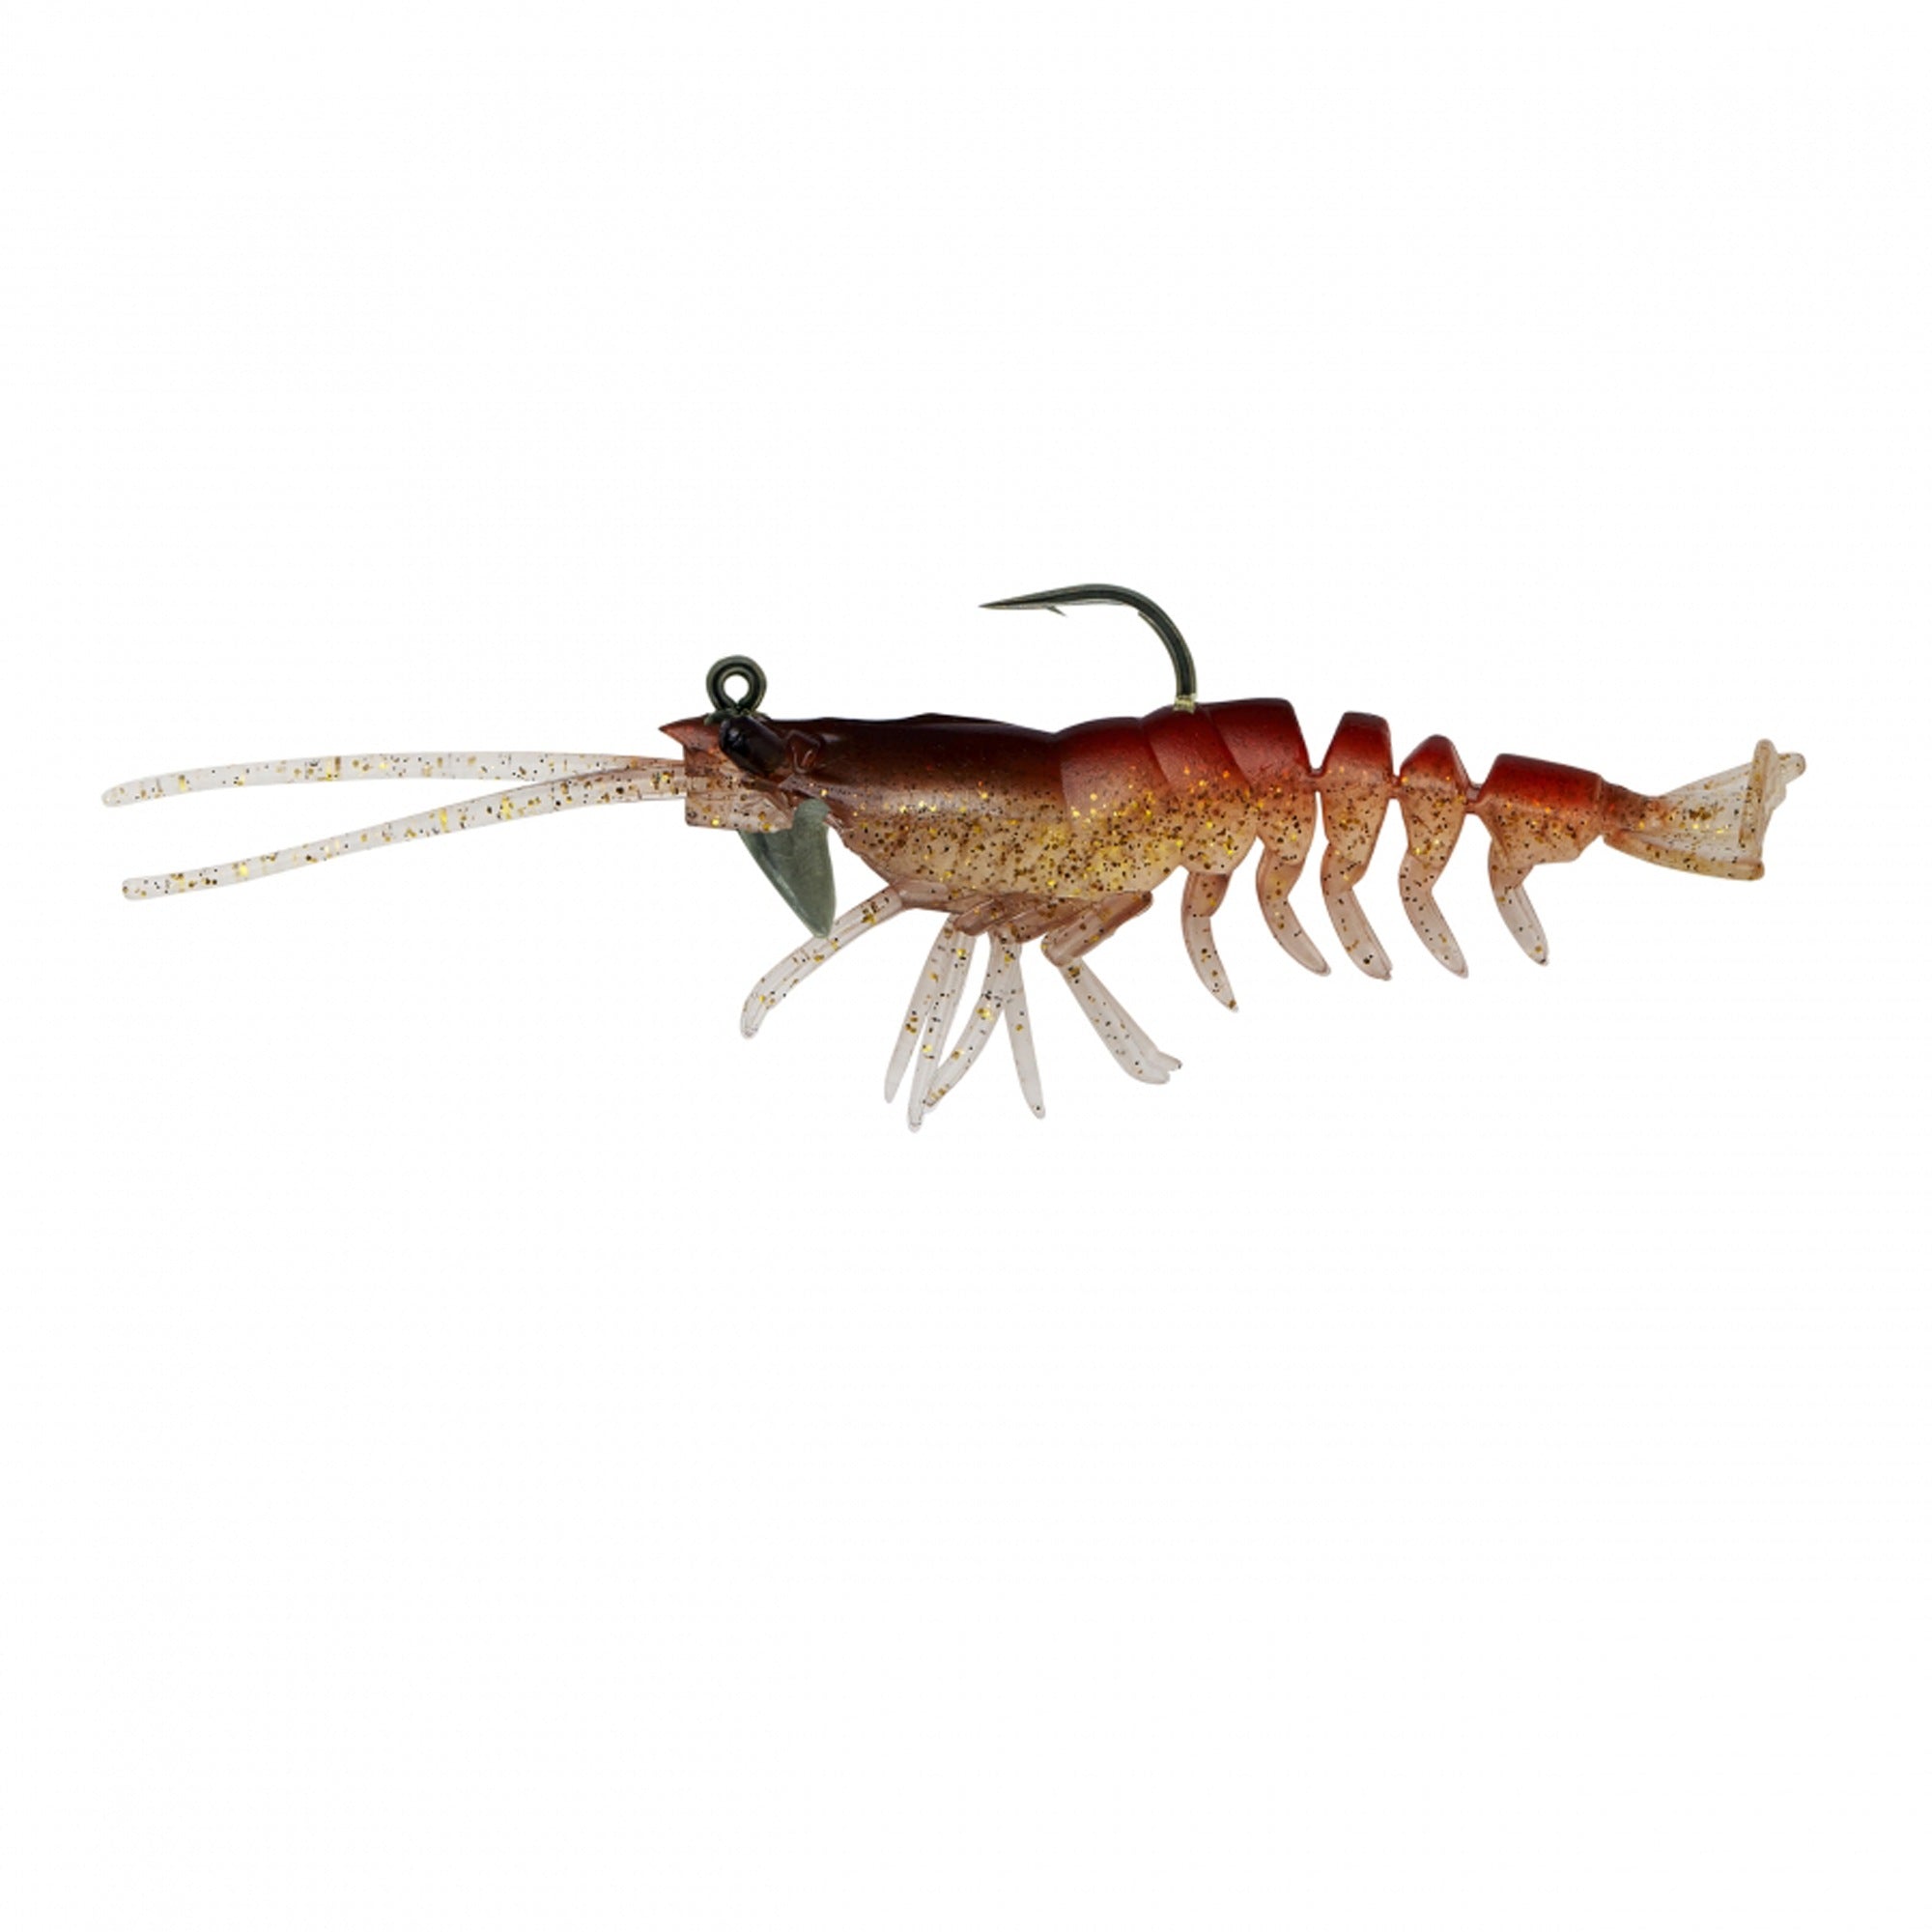 Savage Gear 3D Shrimp Softbait Lures | 3.5 Inch , 5 Inch | 2 Pcs Per Pack | 2 Jigheads Included - fishermanshub5 InchNEW PENNY